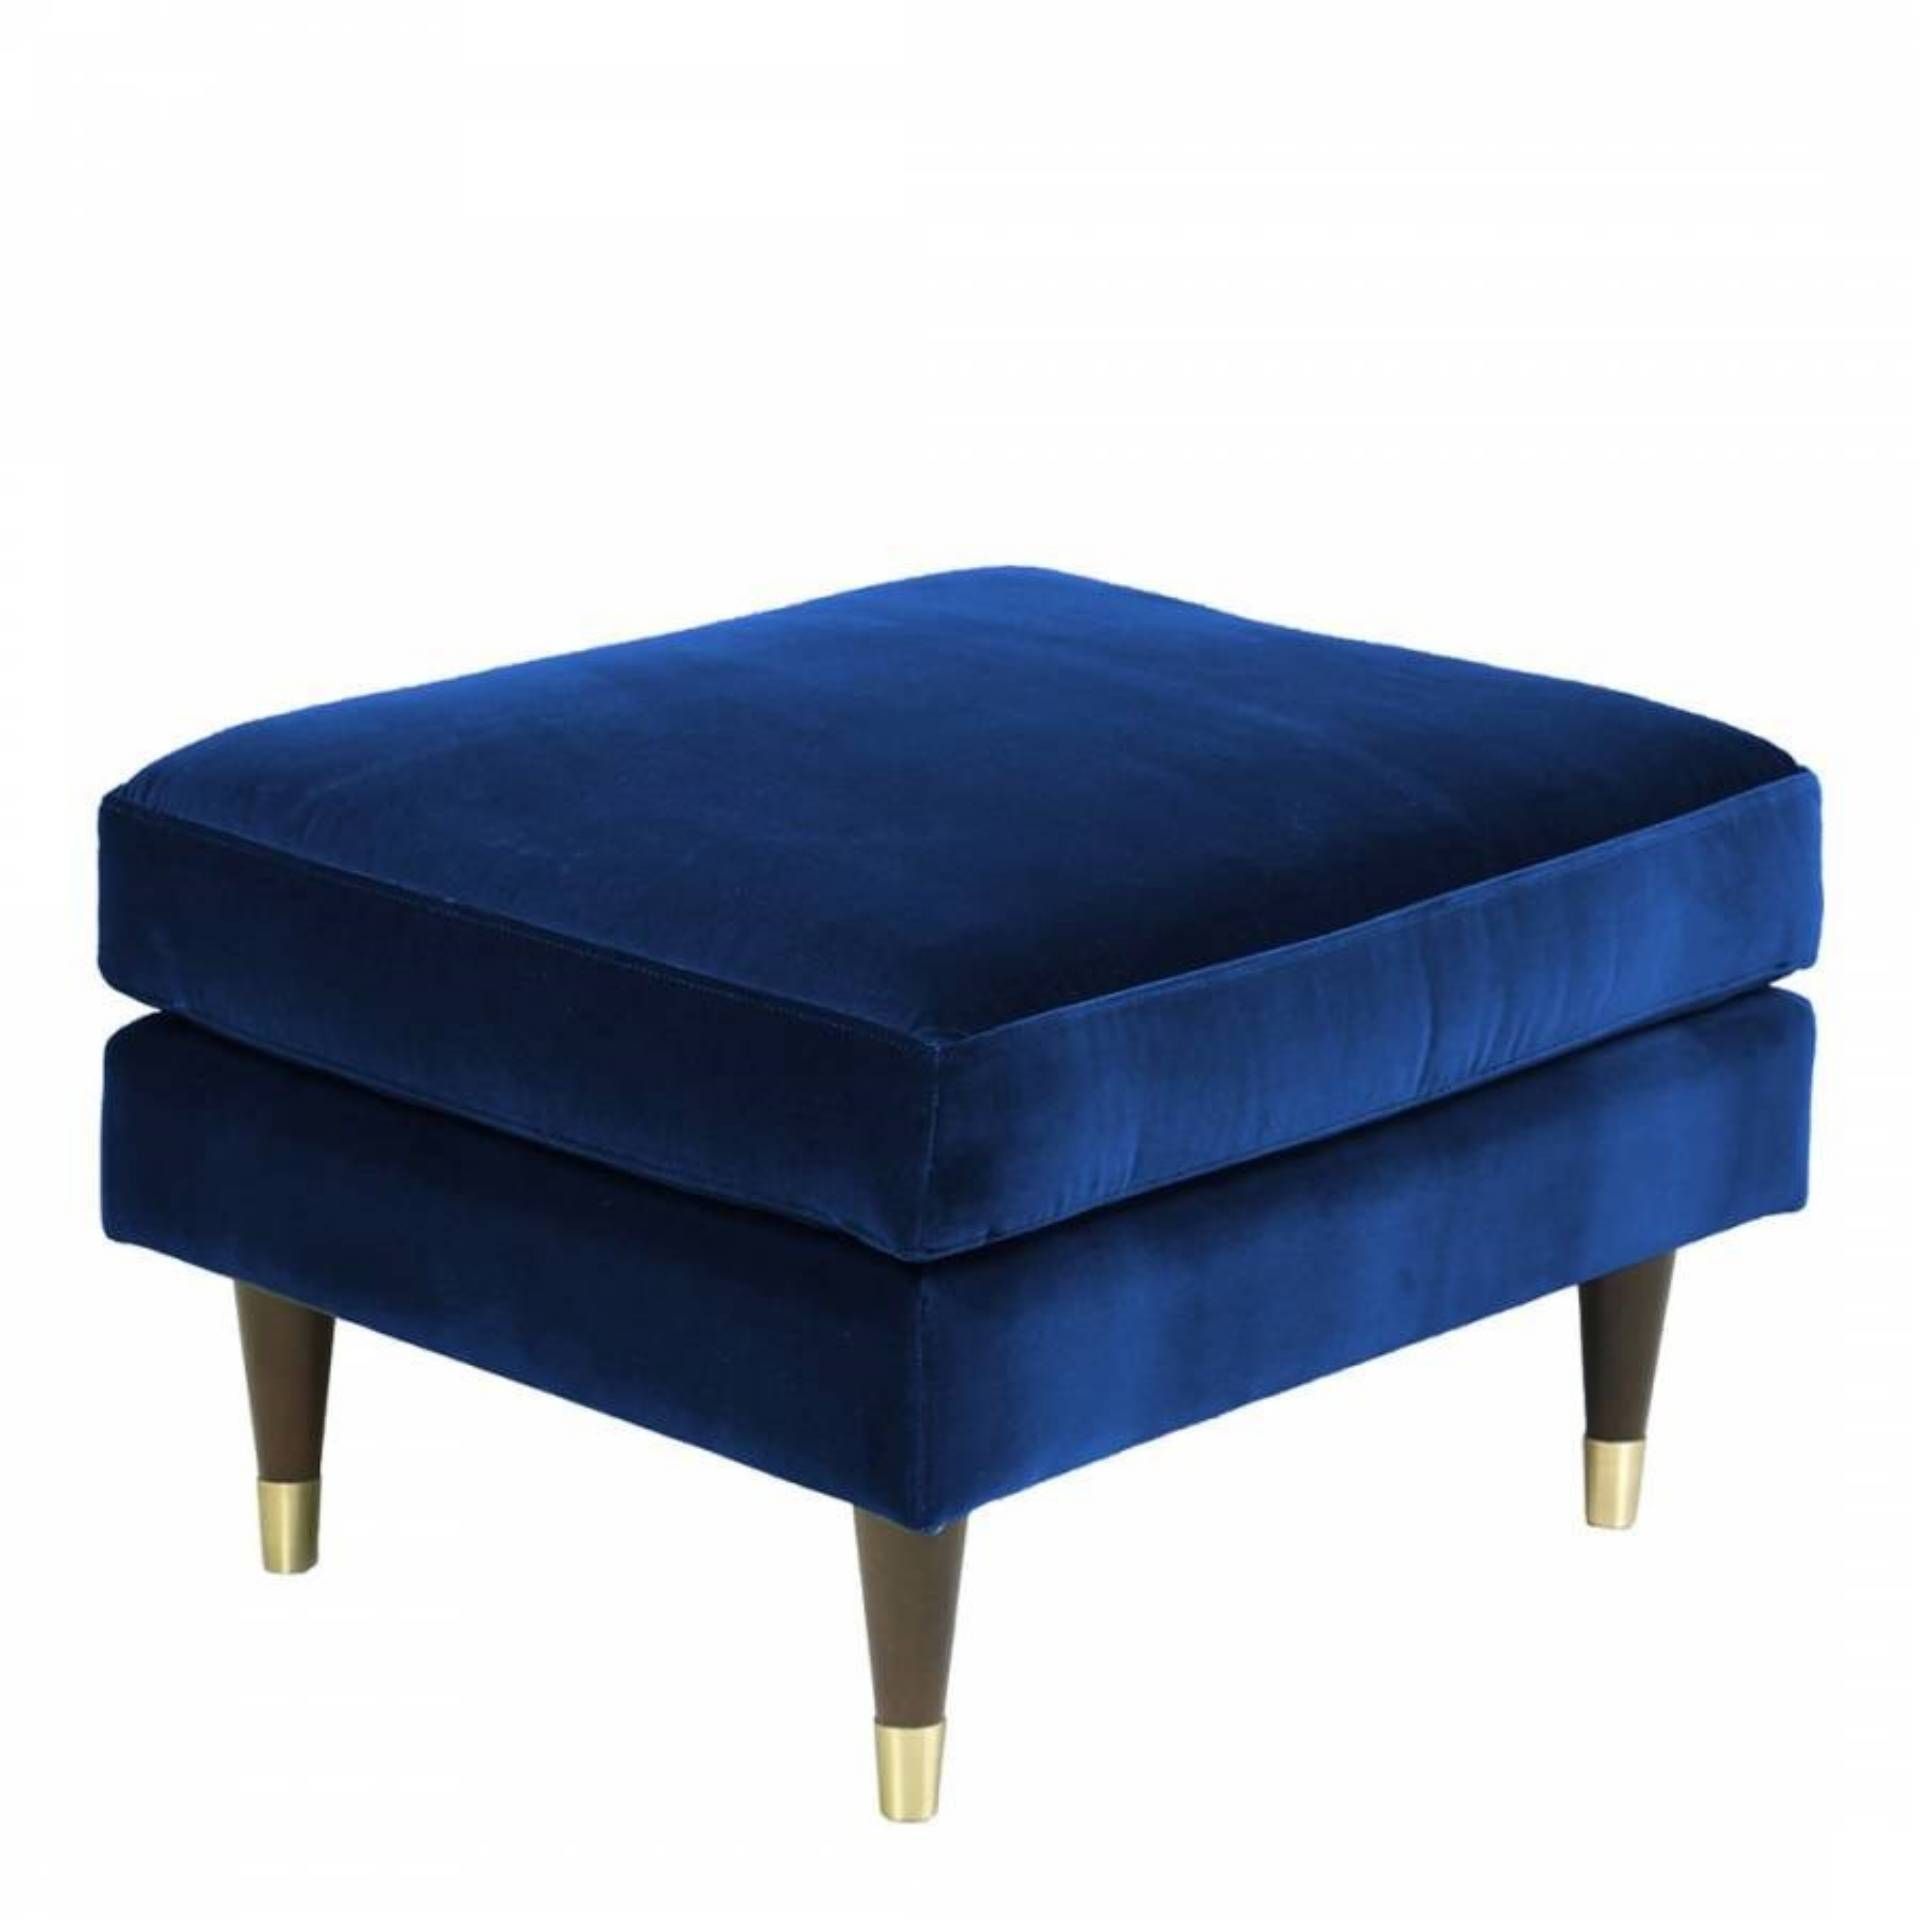 Henry Footstool By Christiane Lemieux Blue Velvet The Footstool With Its Fibre Fill Provides A